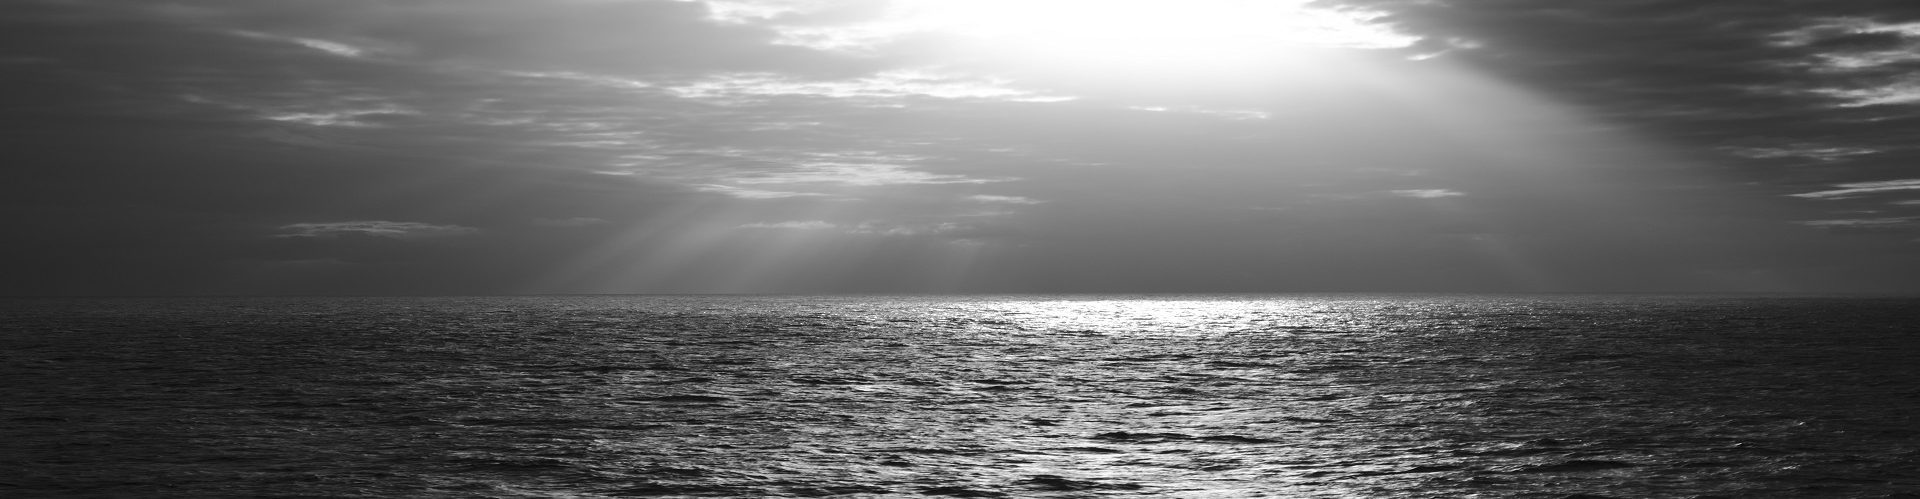 black and white ocean image